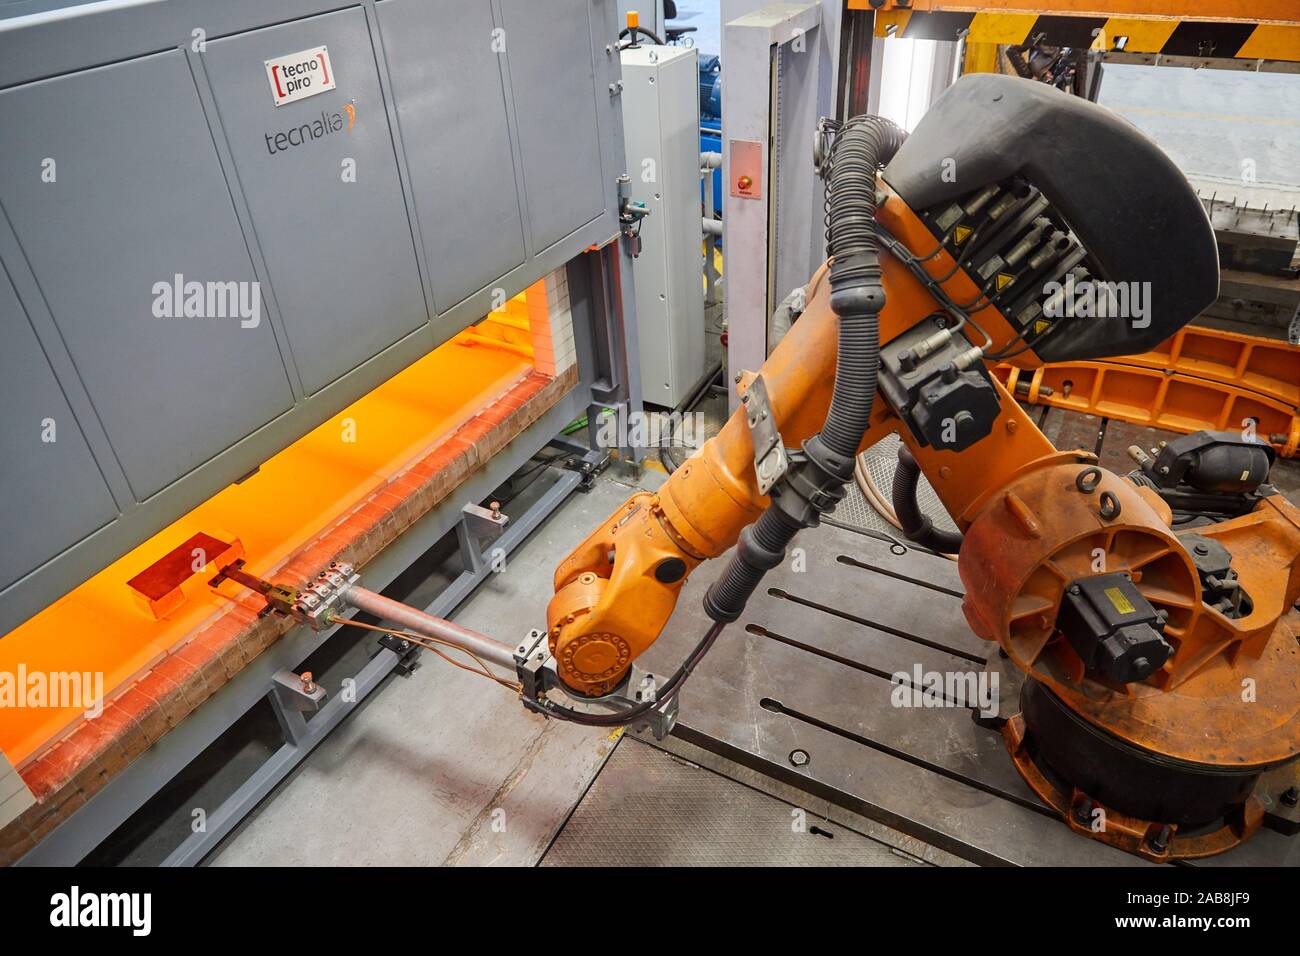 Robot that introduces materials in the oven and later takes them to the press, Hot stamping cell, Industry Unit, Automotive Industry, Technology Stock Photo